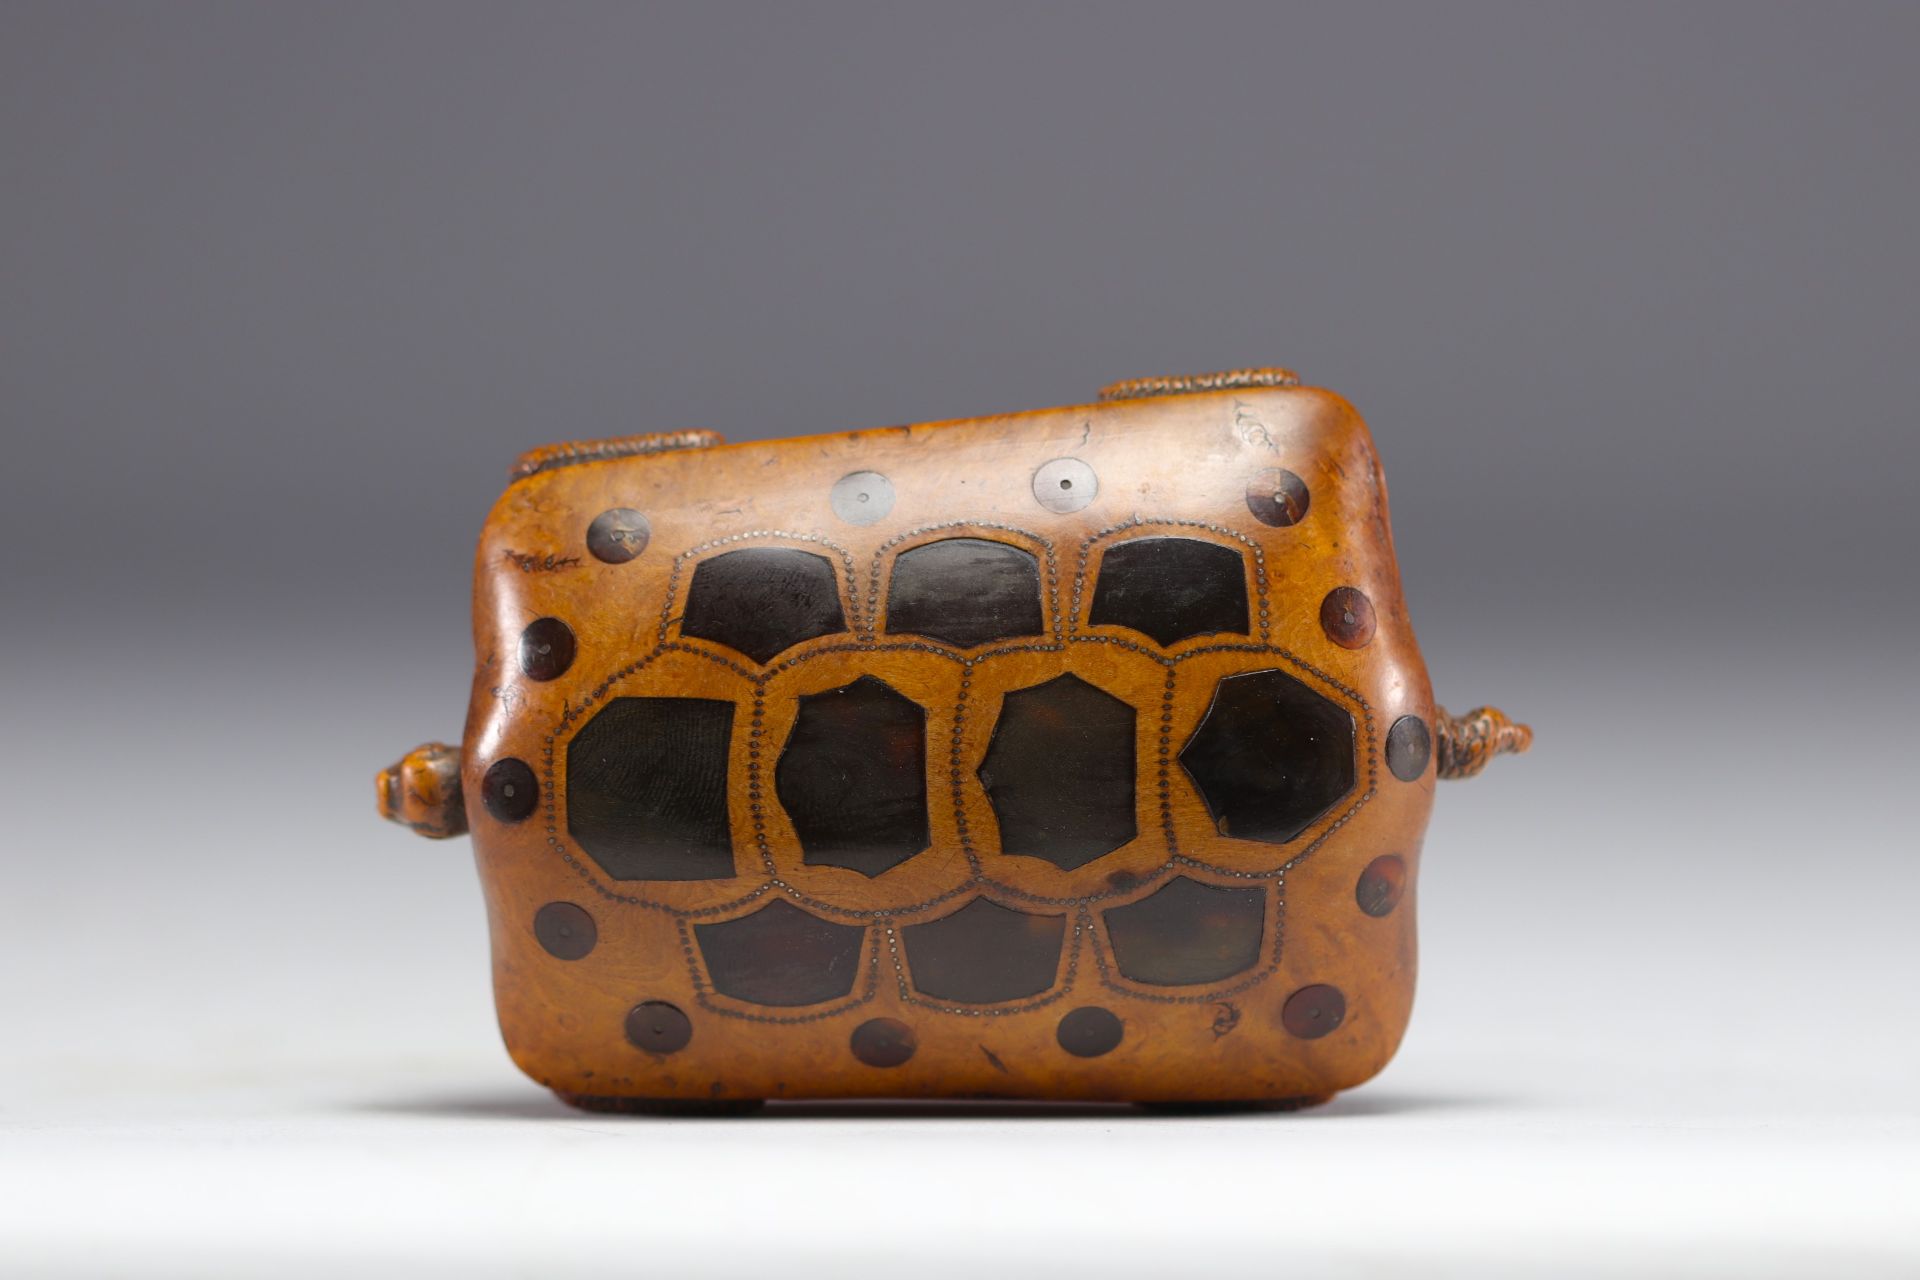 Rare snuff box in the shape of a turtle carved with inlays and nails, 19th century - Image 8 of 8